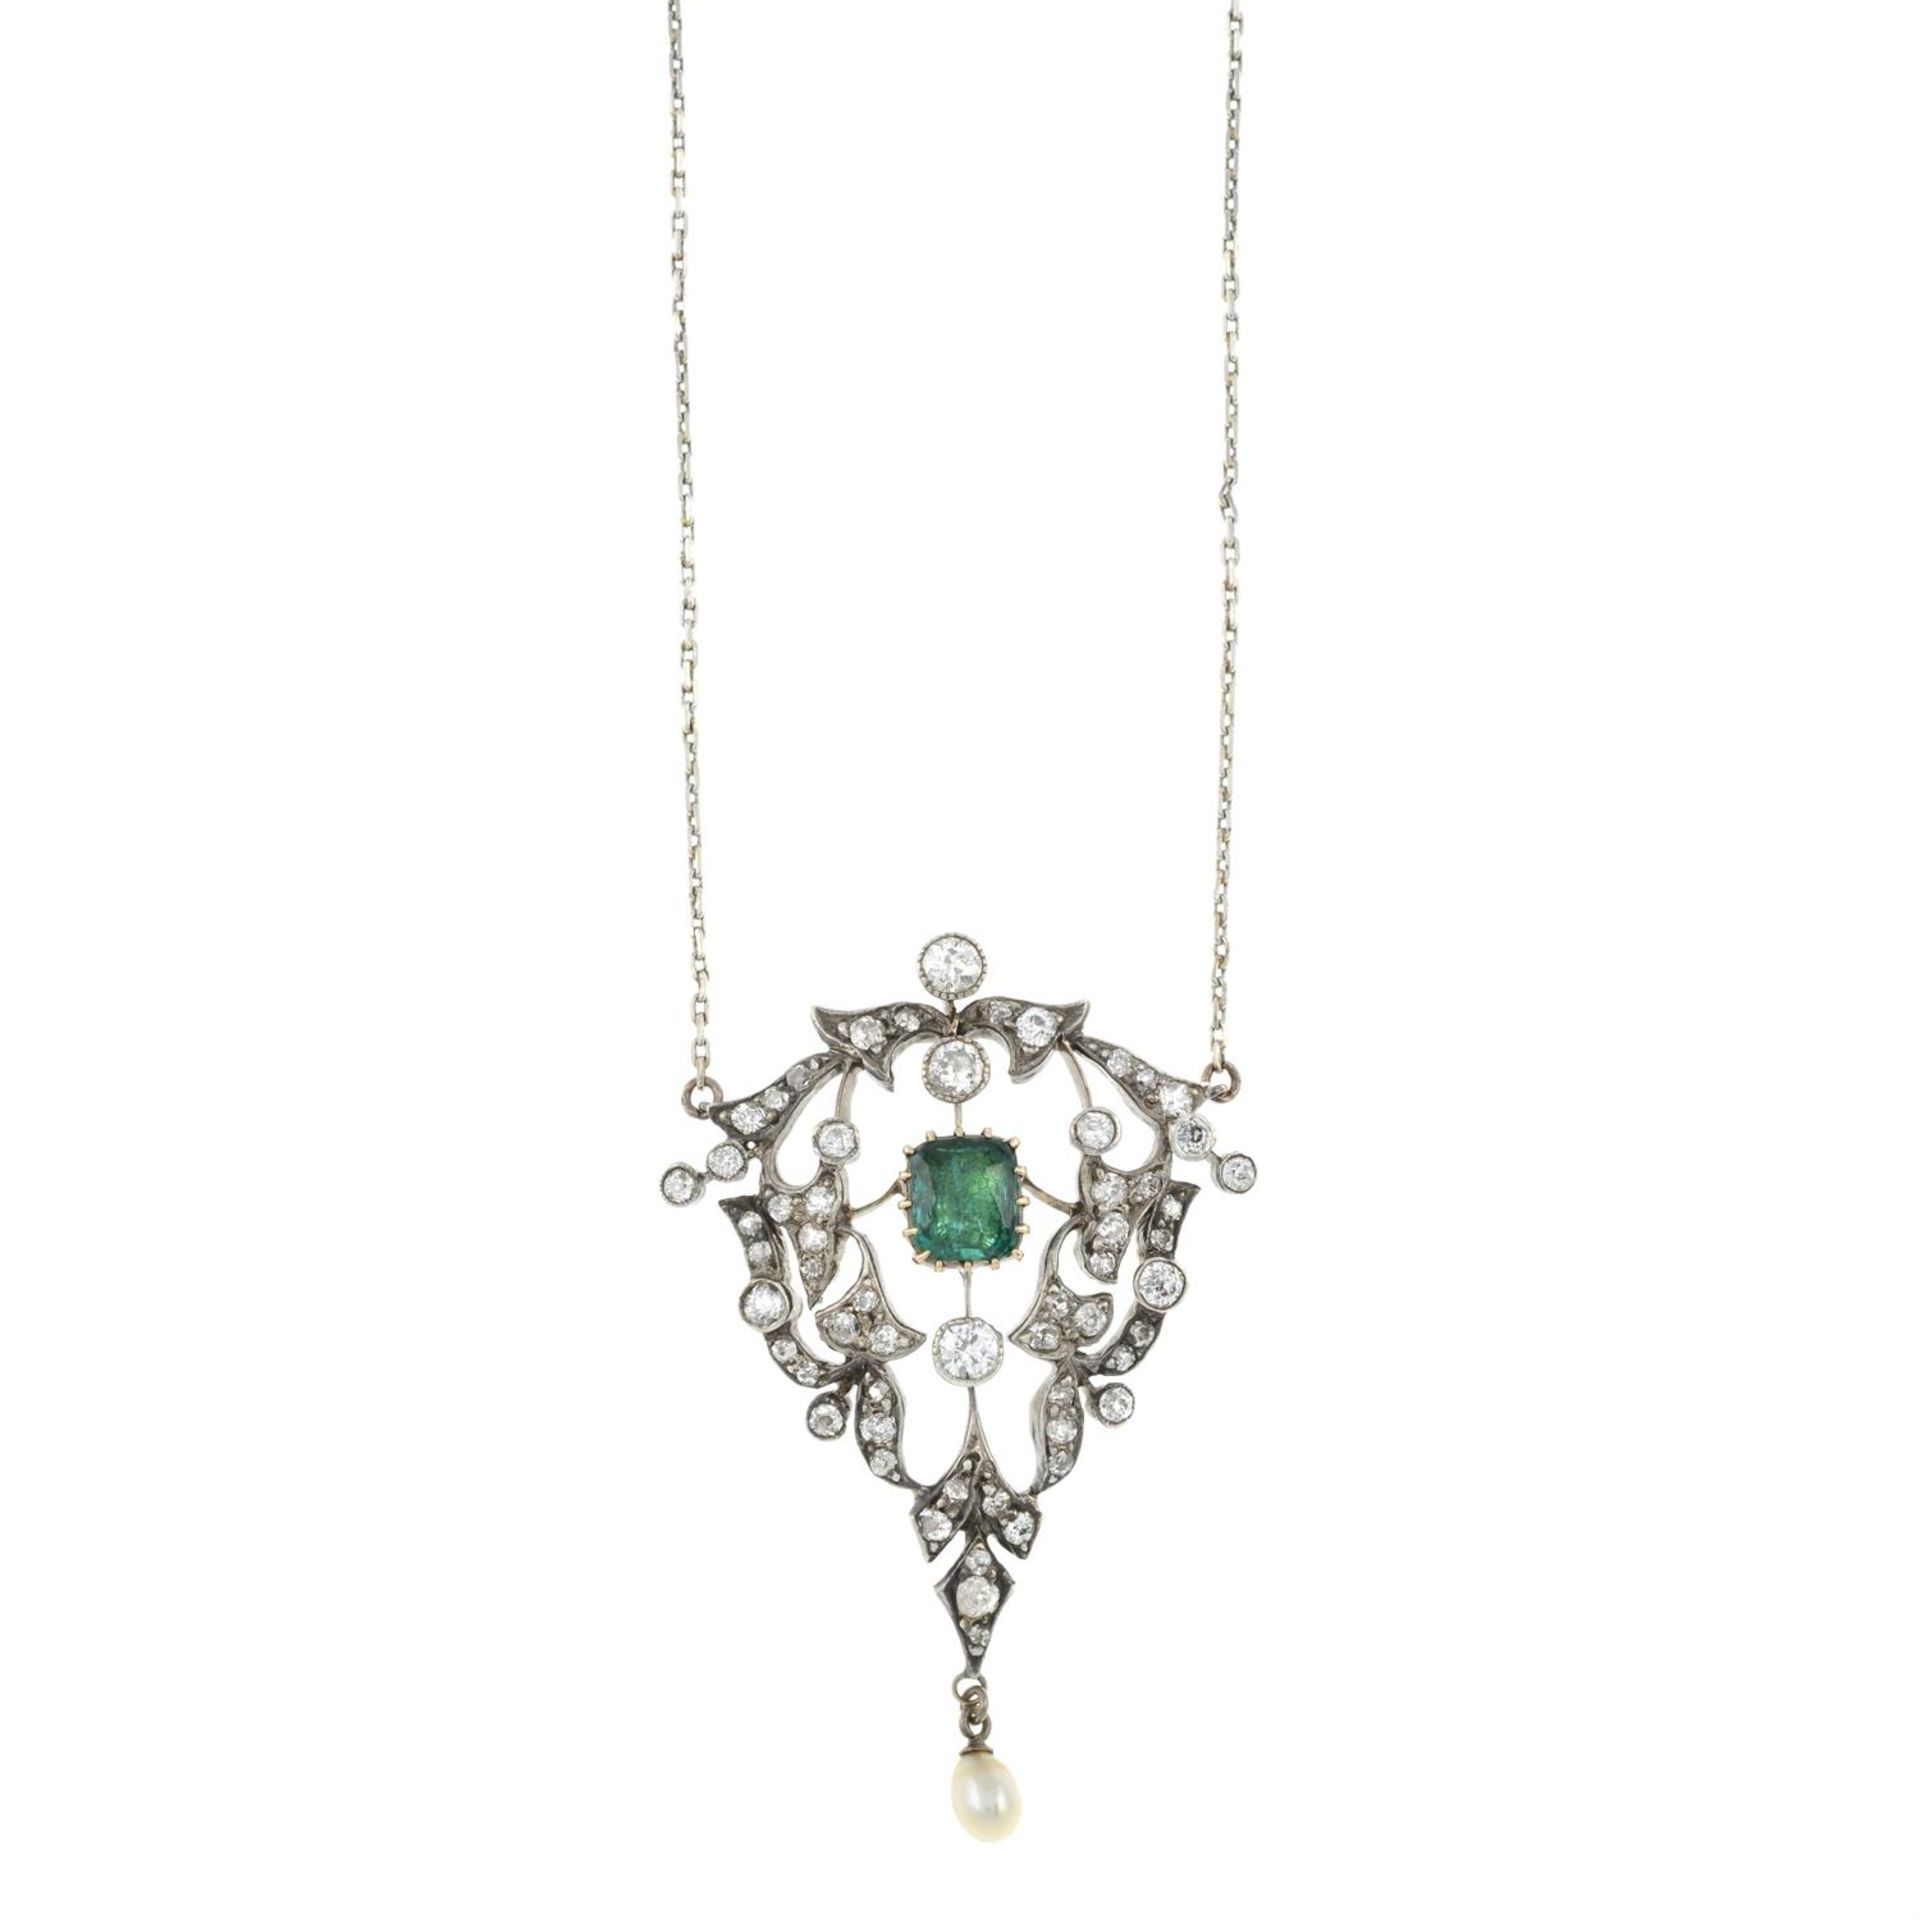 19th century emerald, diamond and pearl necklace - Image 2 of 7